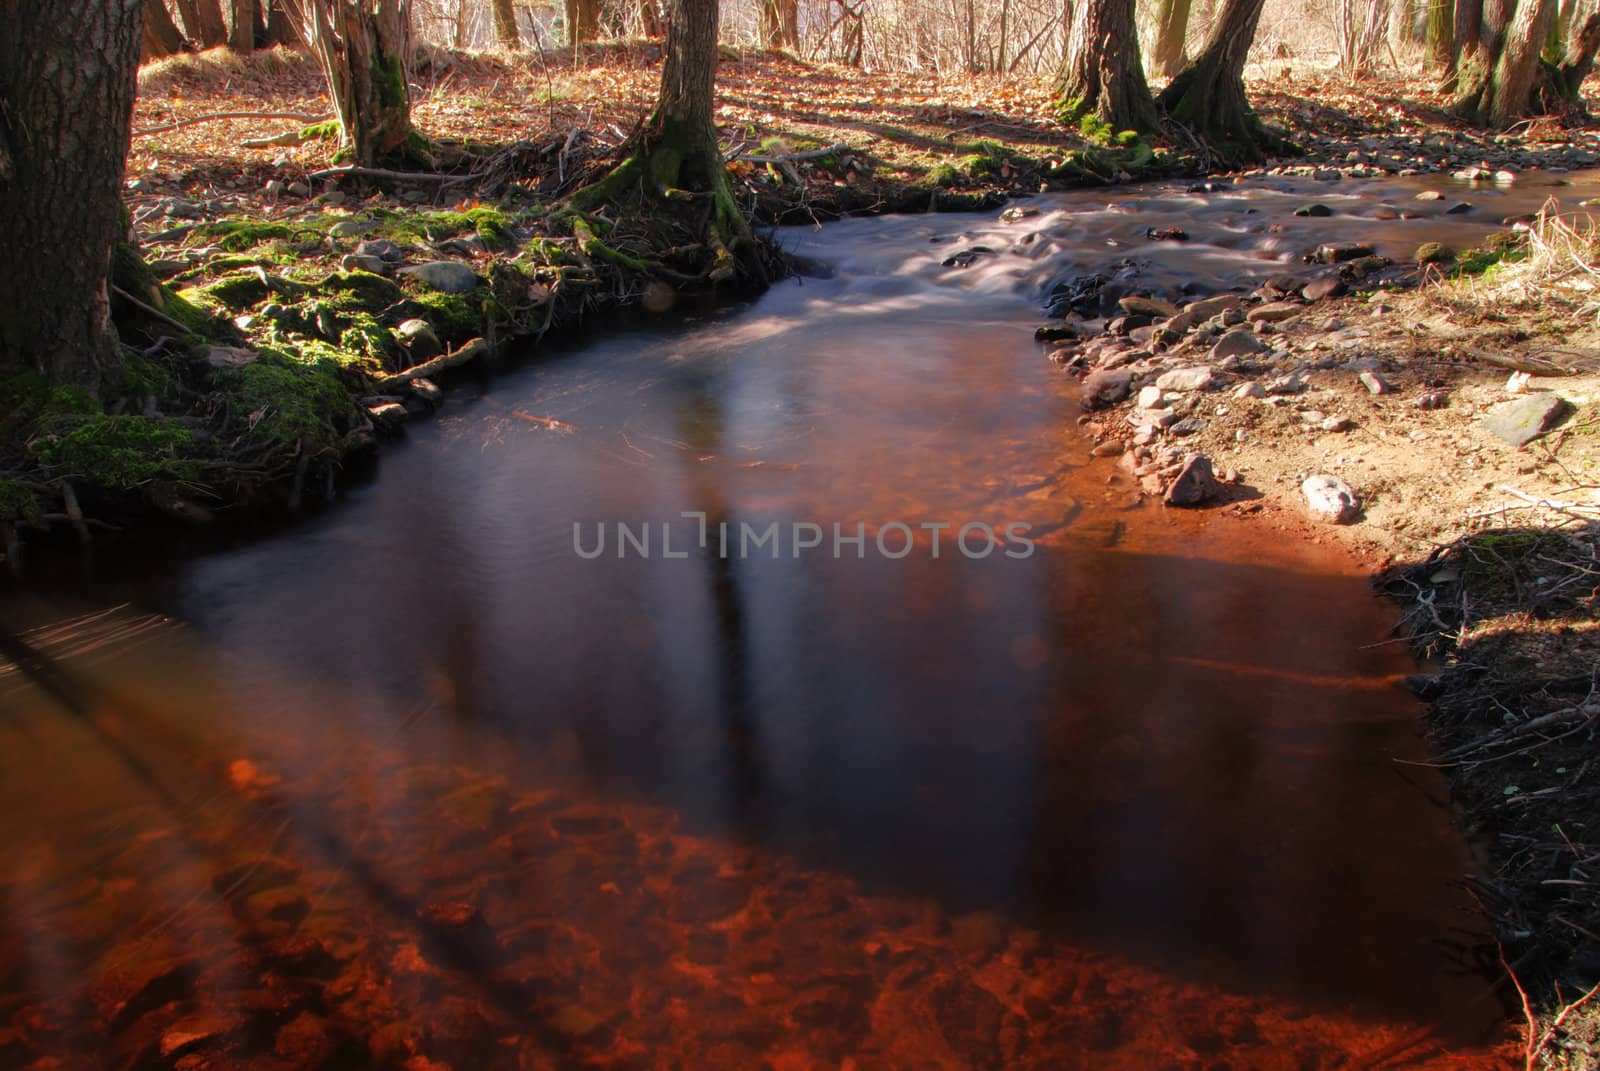 Blood river - a brook with a red water 